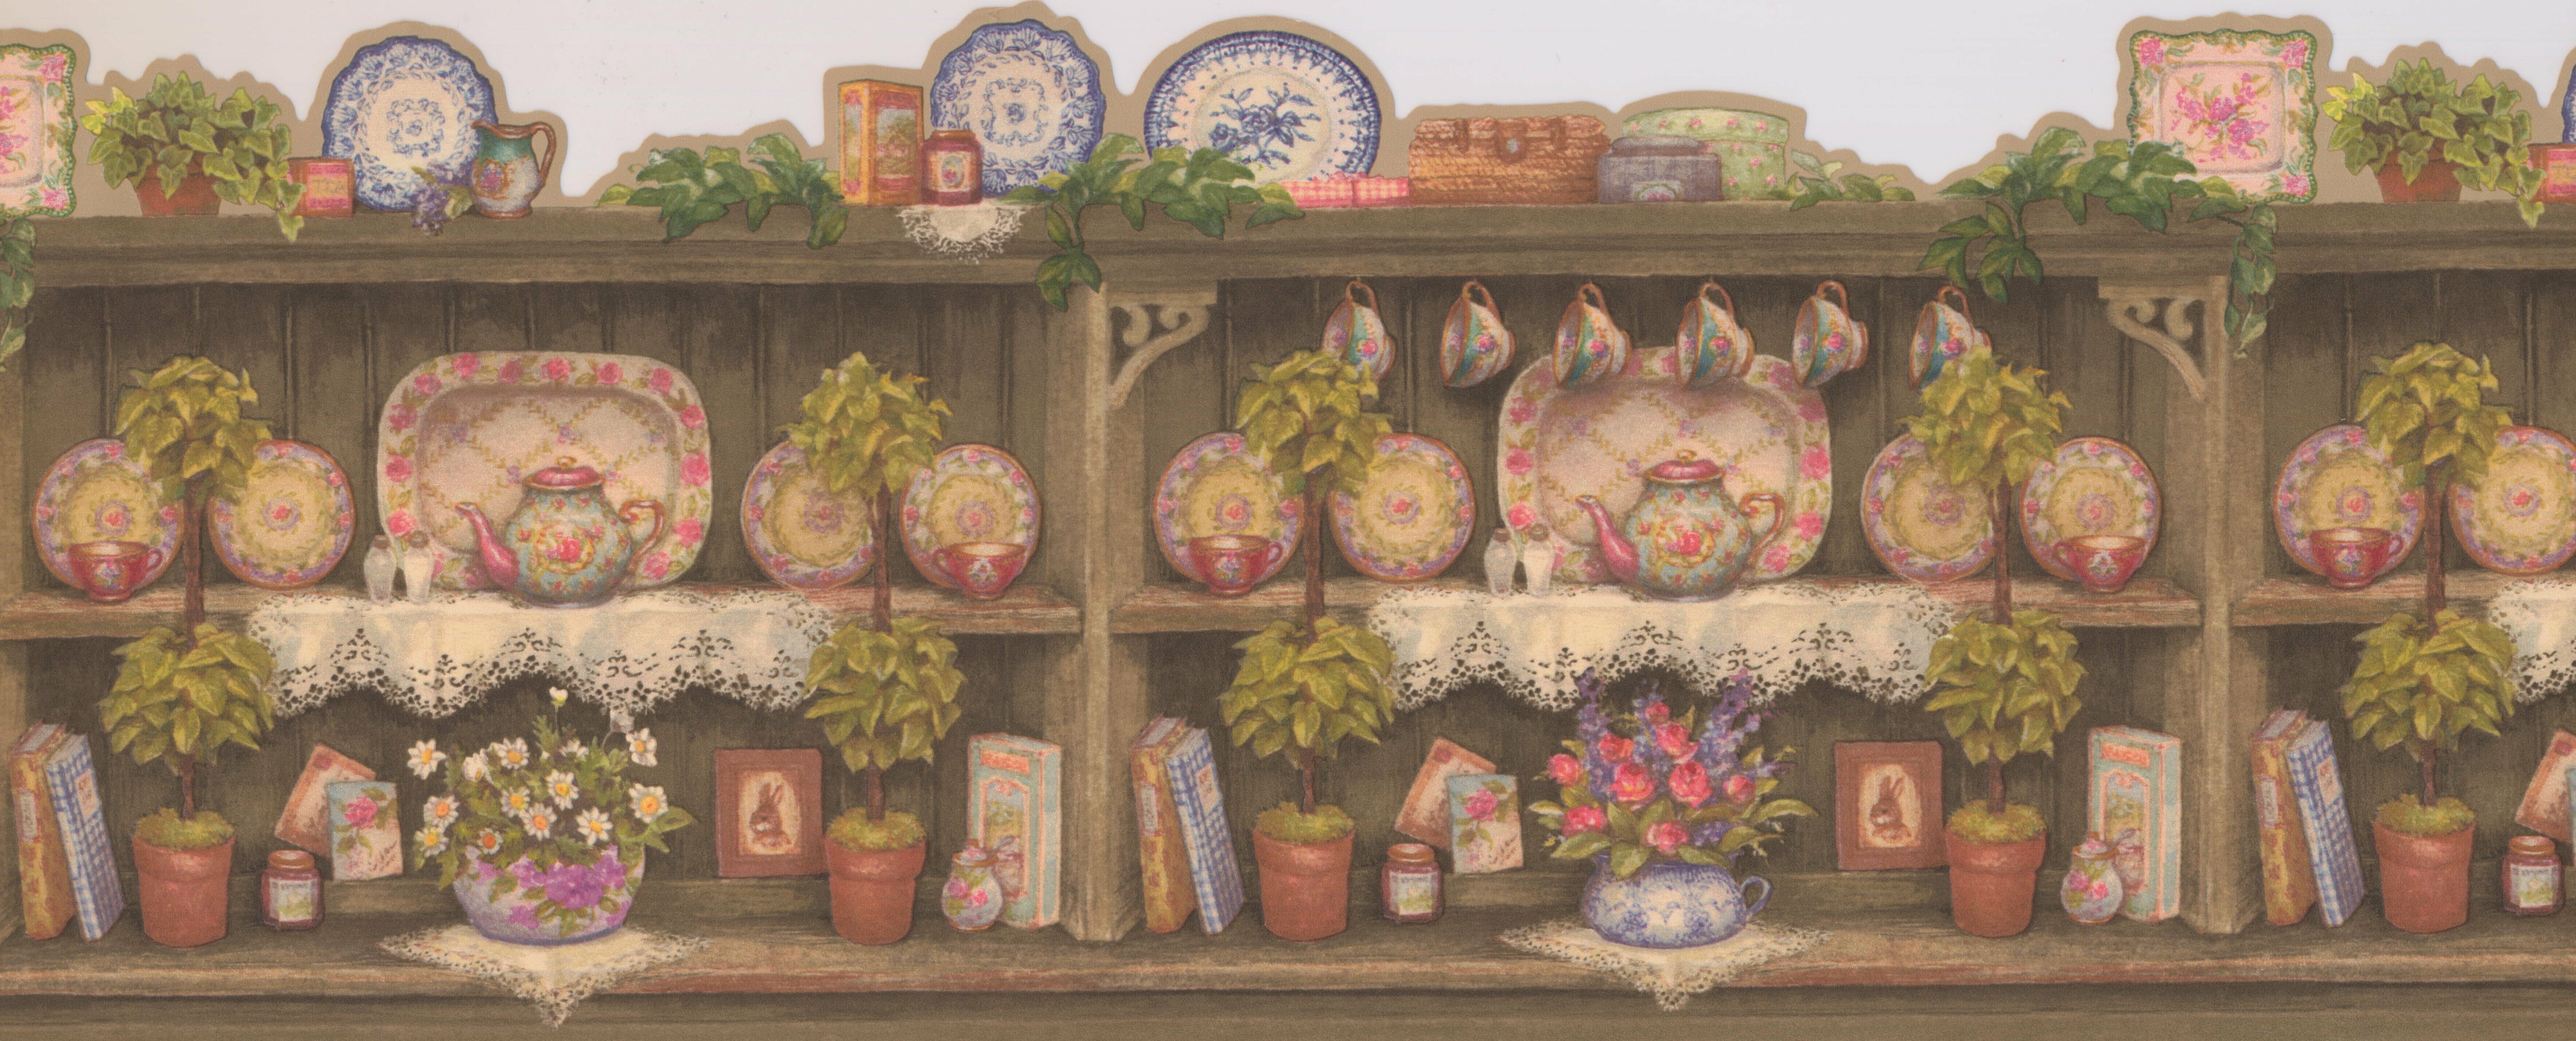 Bourgoin Vintage Wooden Kitchen Cabinets With Plates Cups Plants Trays Kettle Wide 9 5 L X 180 W Wallpaper Border